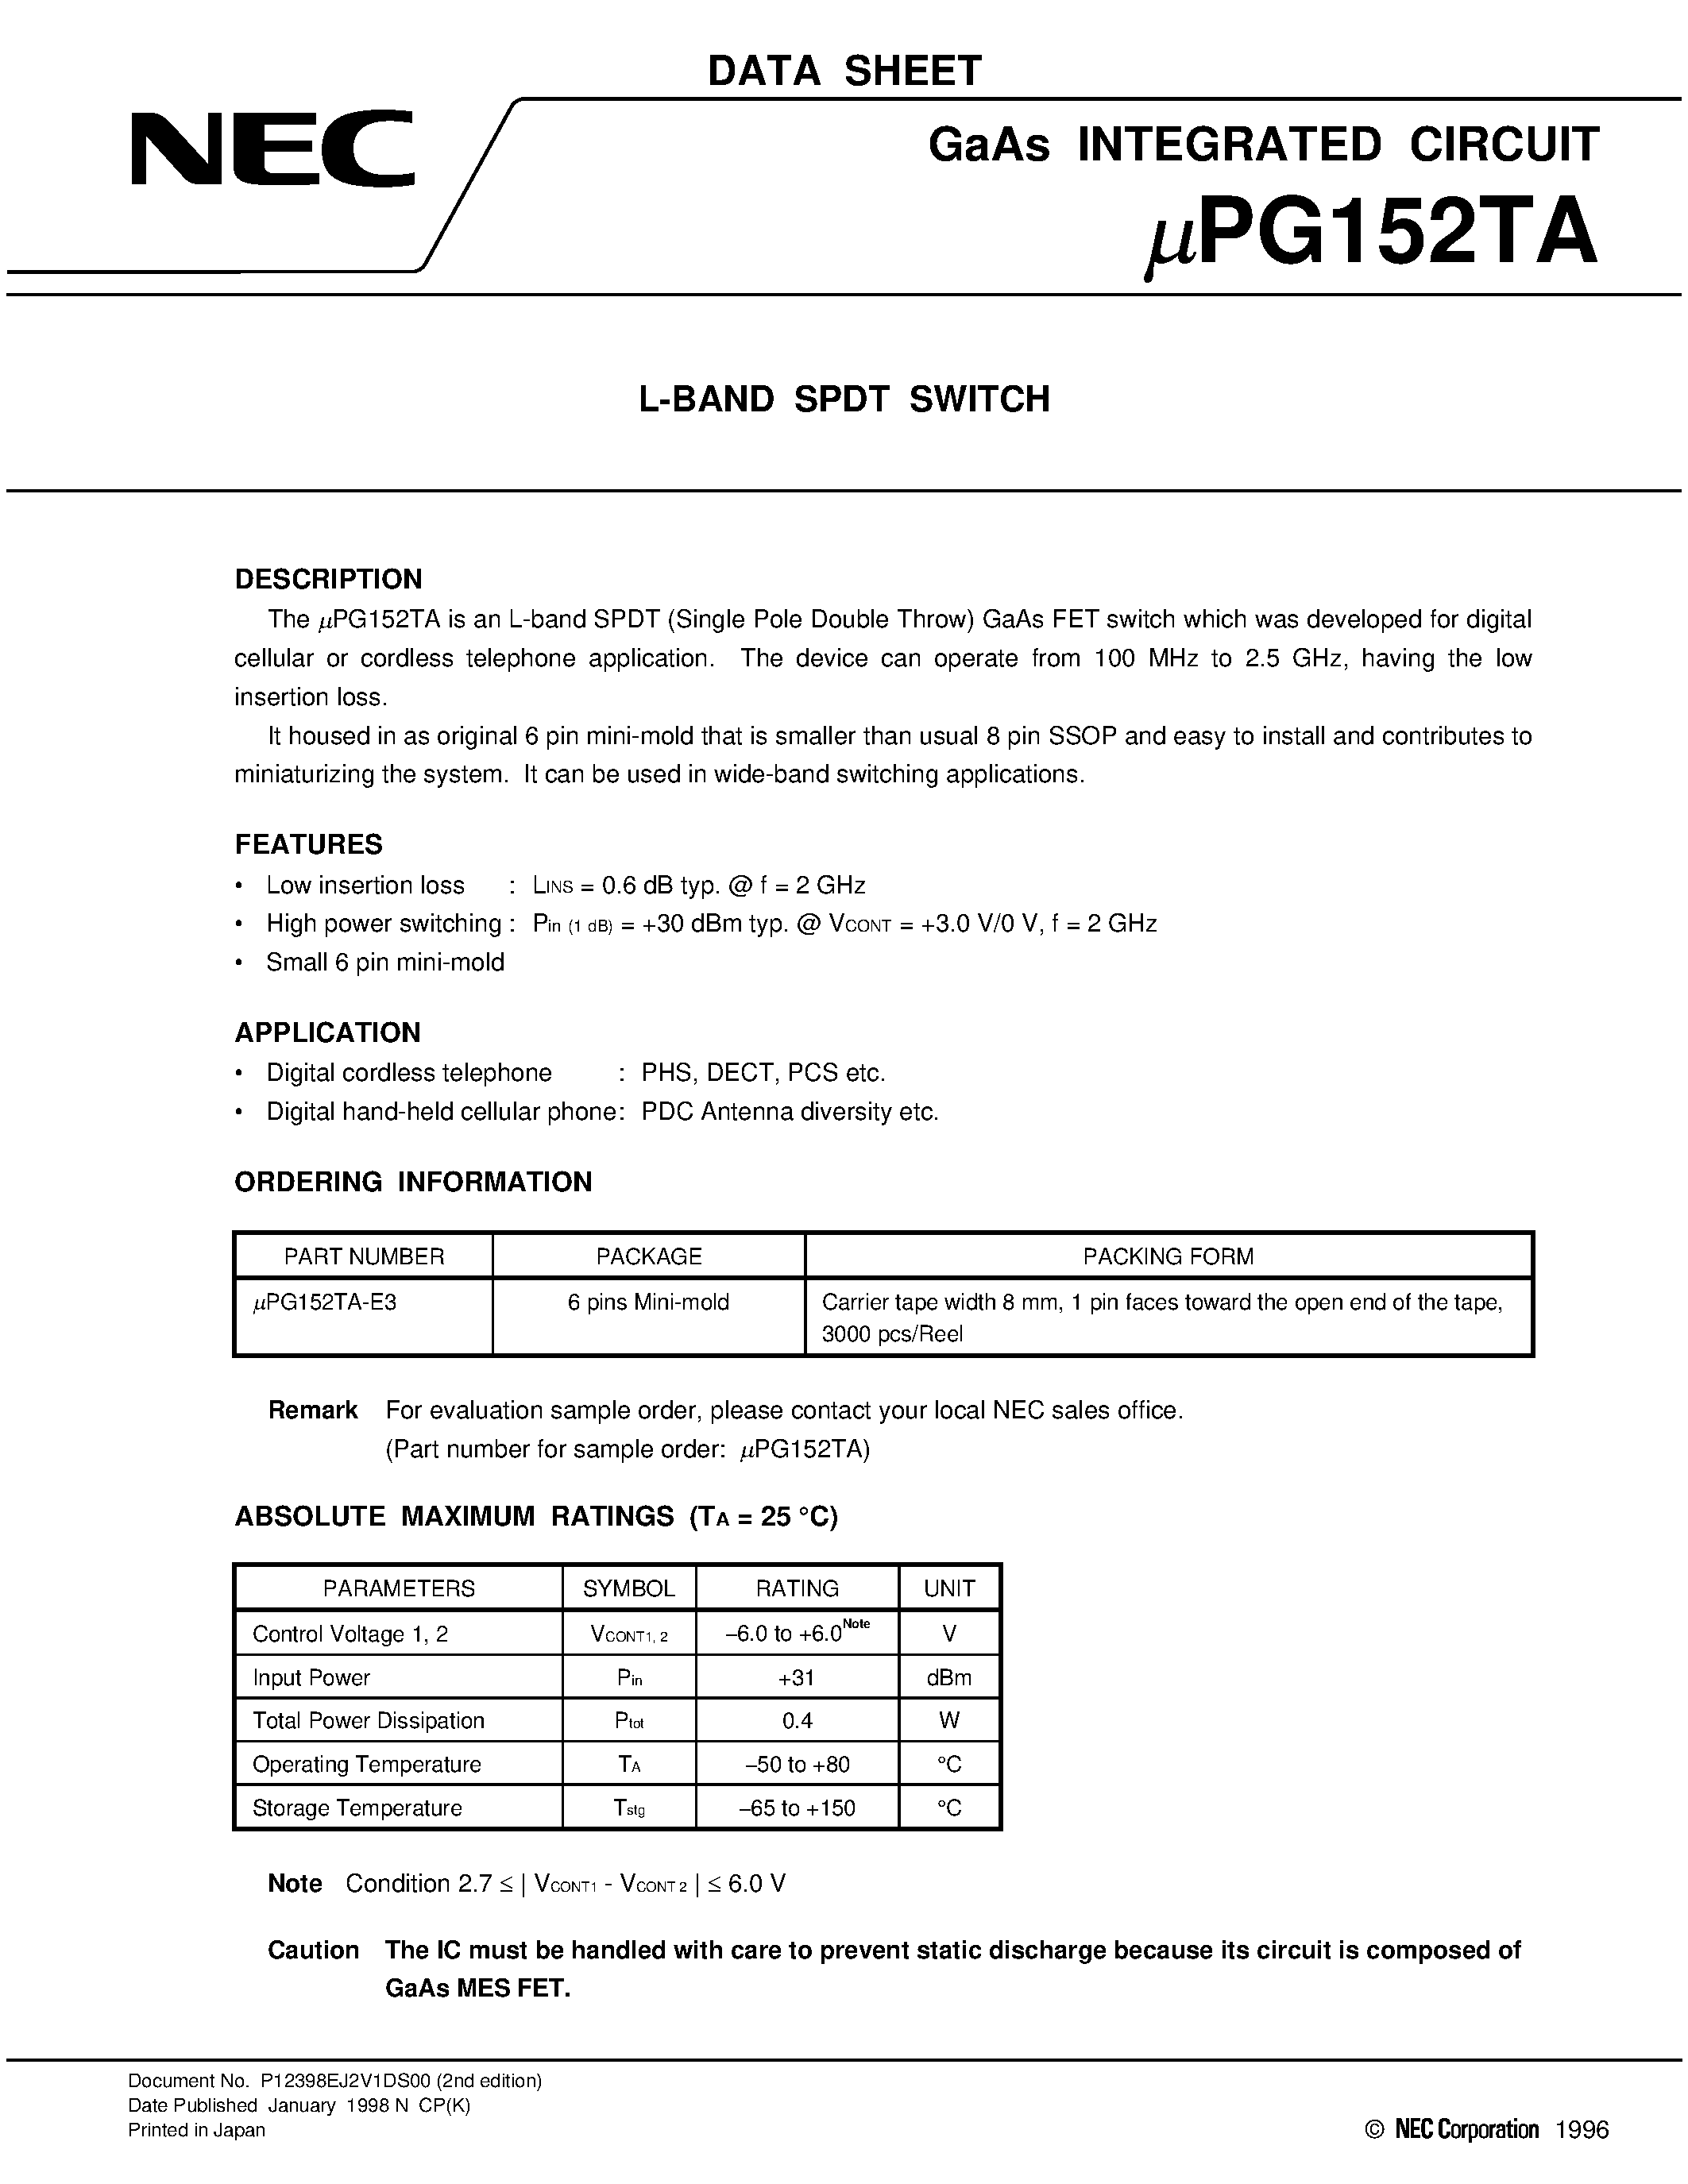 Datasheet UPG152TA - L-BAND SPDT SWITCH page 1